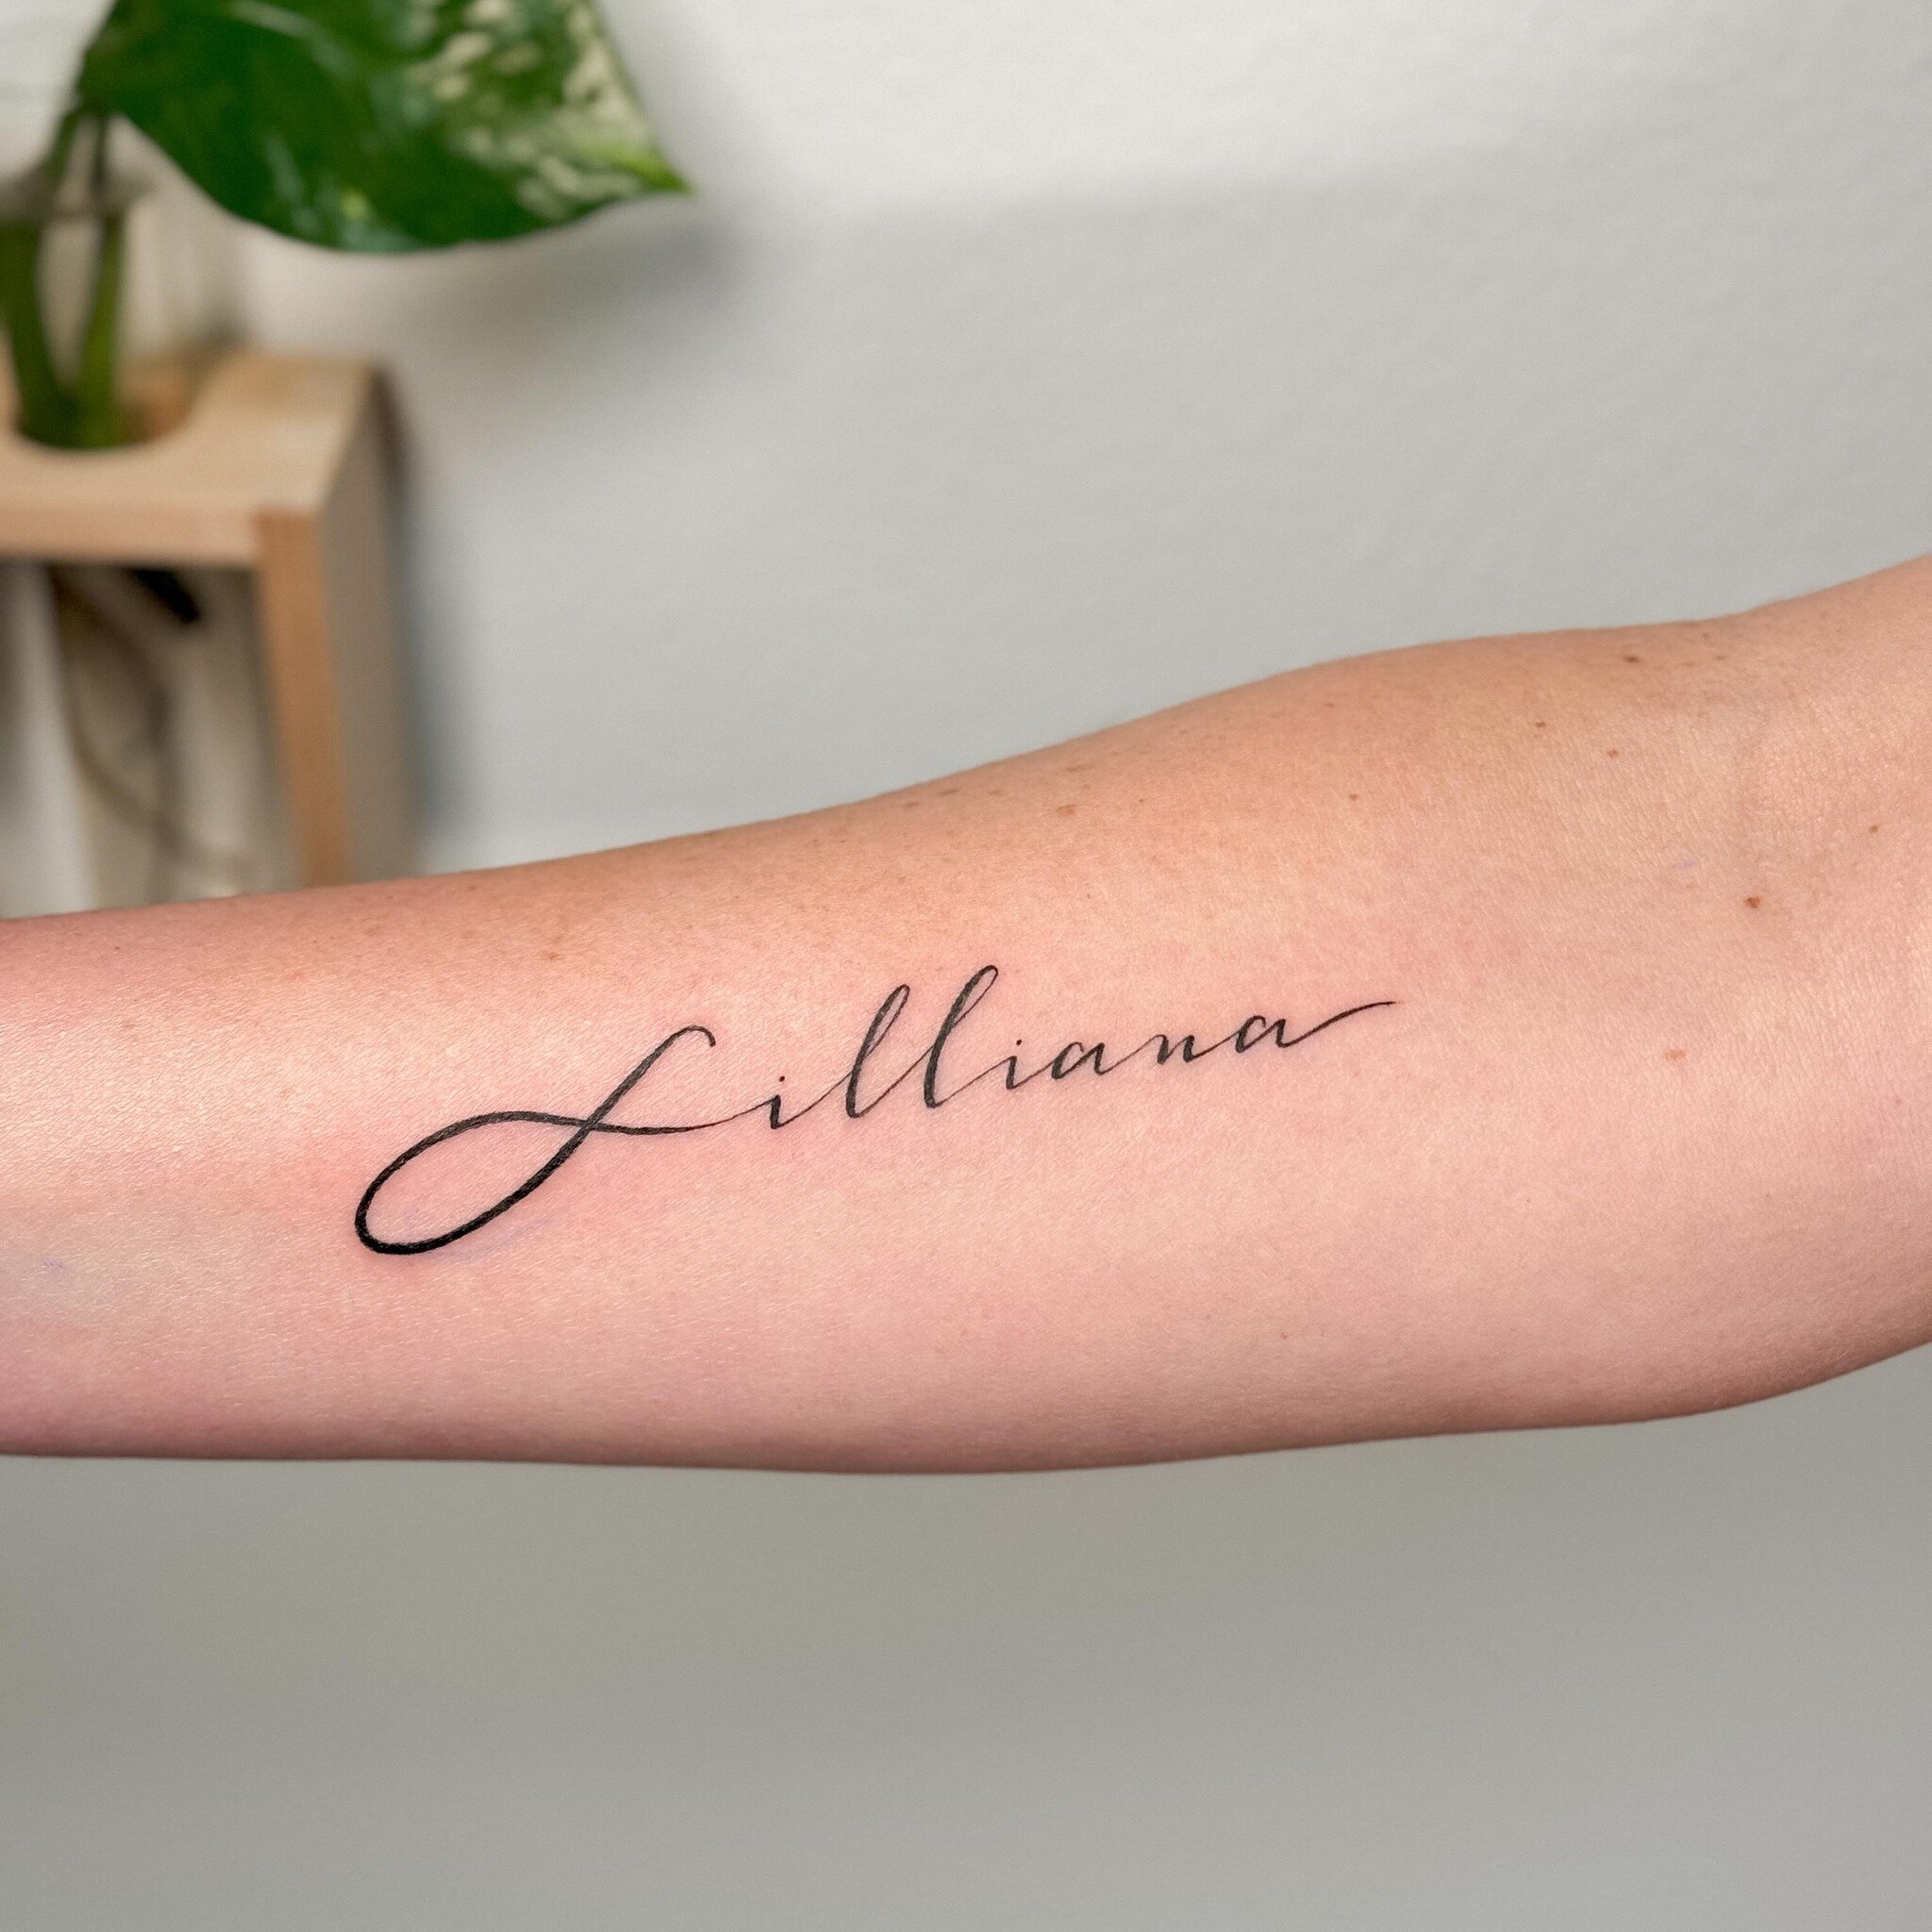 When your client asks for her daughter&rsquo;s name in script but nothing feels right 👉🏻 you create something bespoke ✨

#seattletattoo #northbendtattoo #snoqualmievalley #tattoosofinstagram #finelinetattoo #bellevuetattoo #scripttattoos #handlette